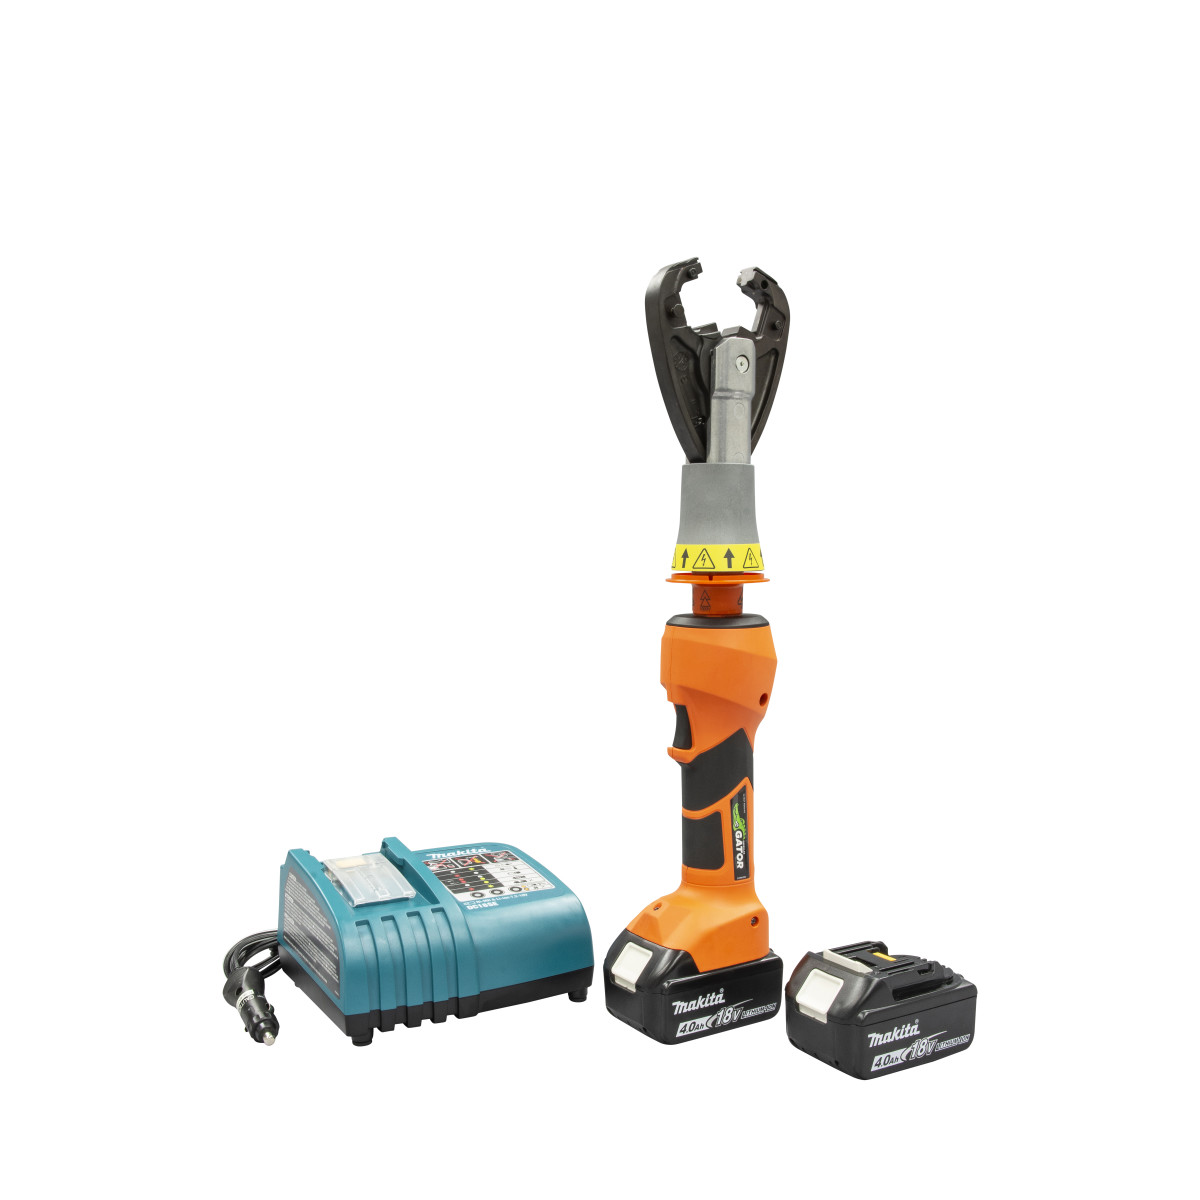 6 Ton Insulated Crimper with CJK Head and 12V Charger. 1000v Insulation. Brush guarded head - helps avoid accidental contact with conductors. Tri-insulation barrier - Provides three (3) layers of protection (Patent Pending). 360° Rotating head  - For improved agility in confined work spaces. Double -tap safety feature option -Prevents unintentional operation. Bluetooth® communication